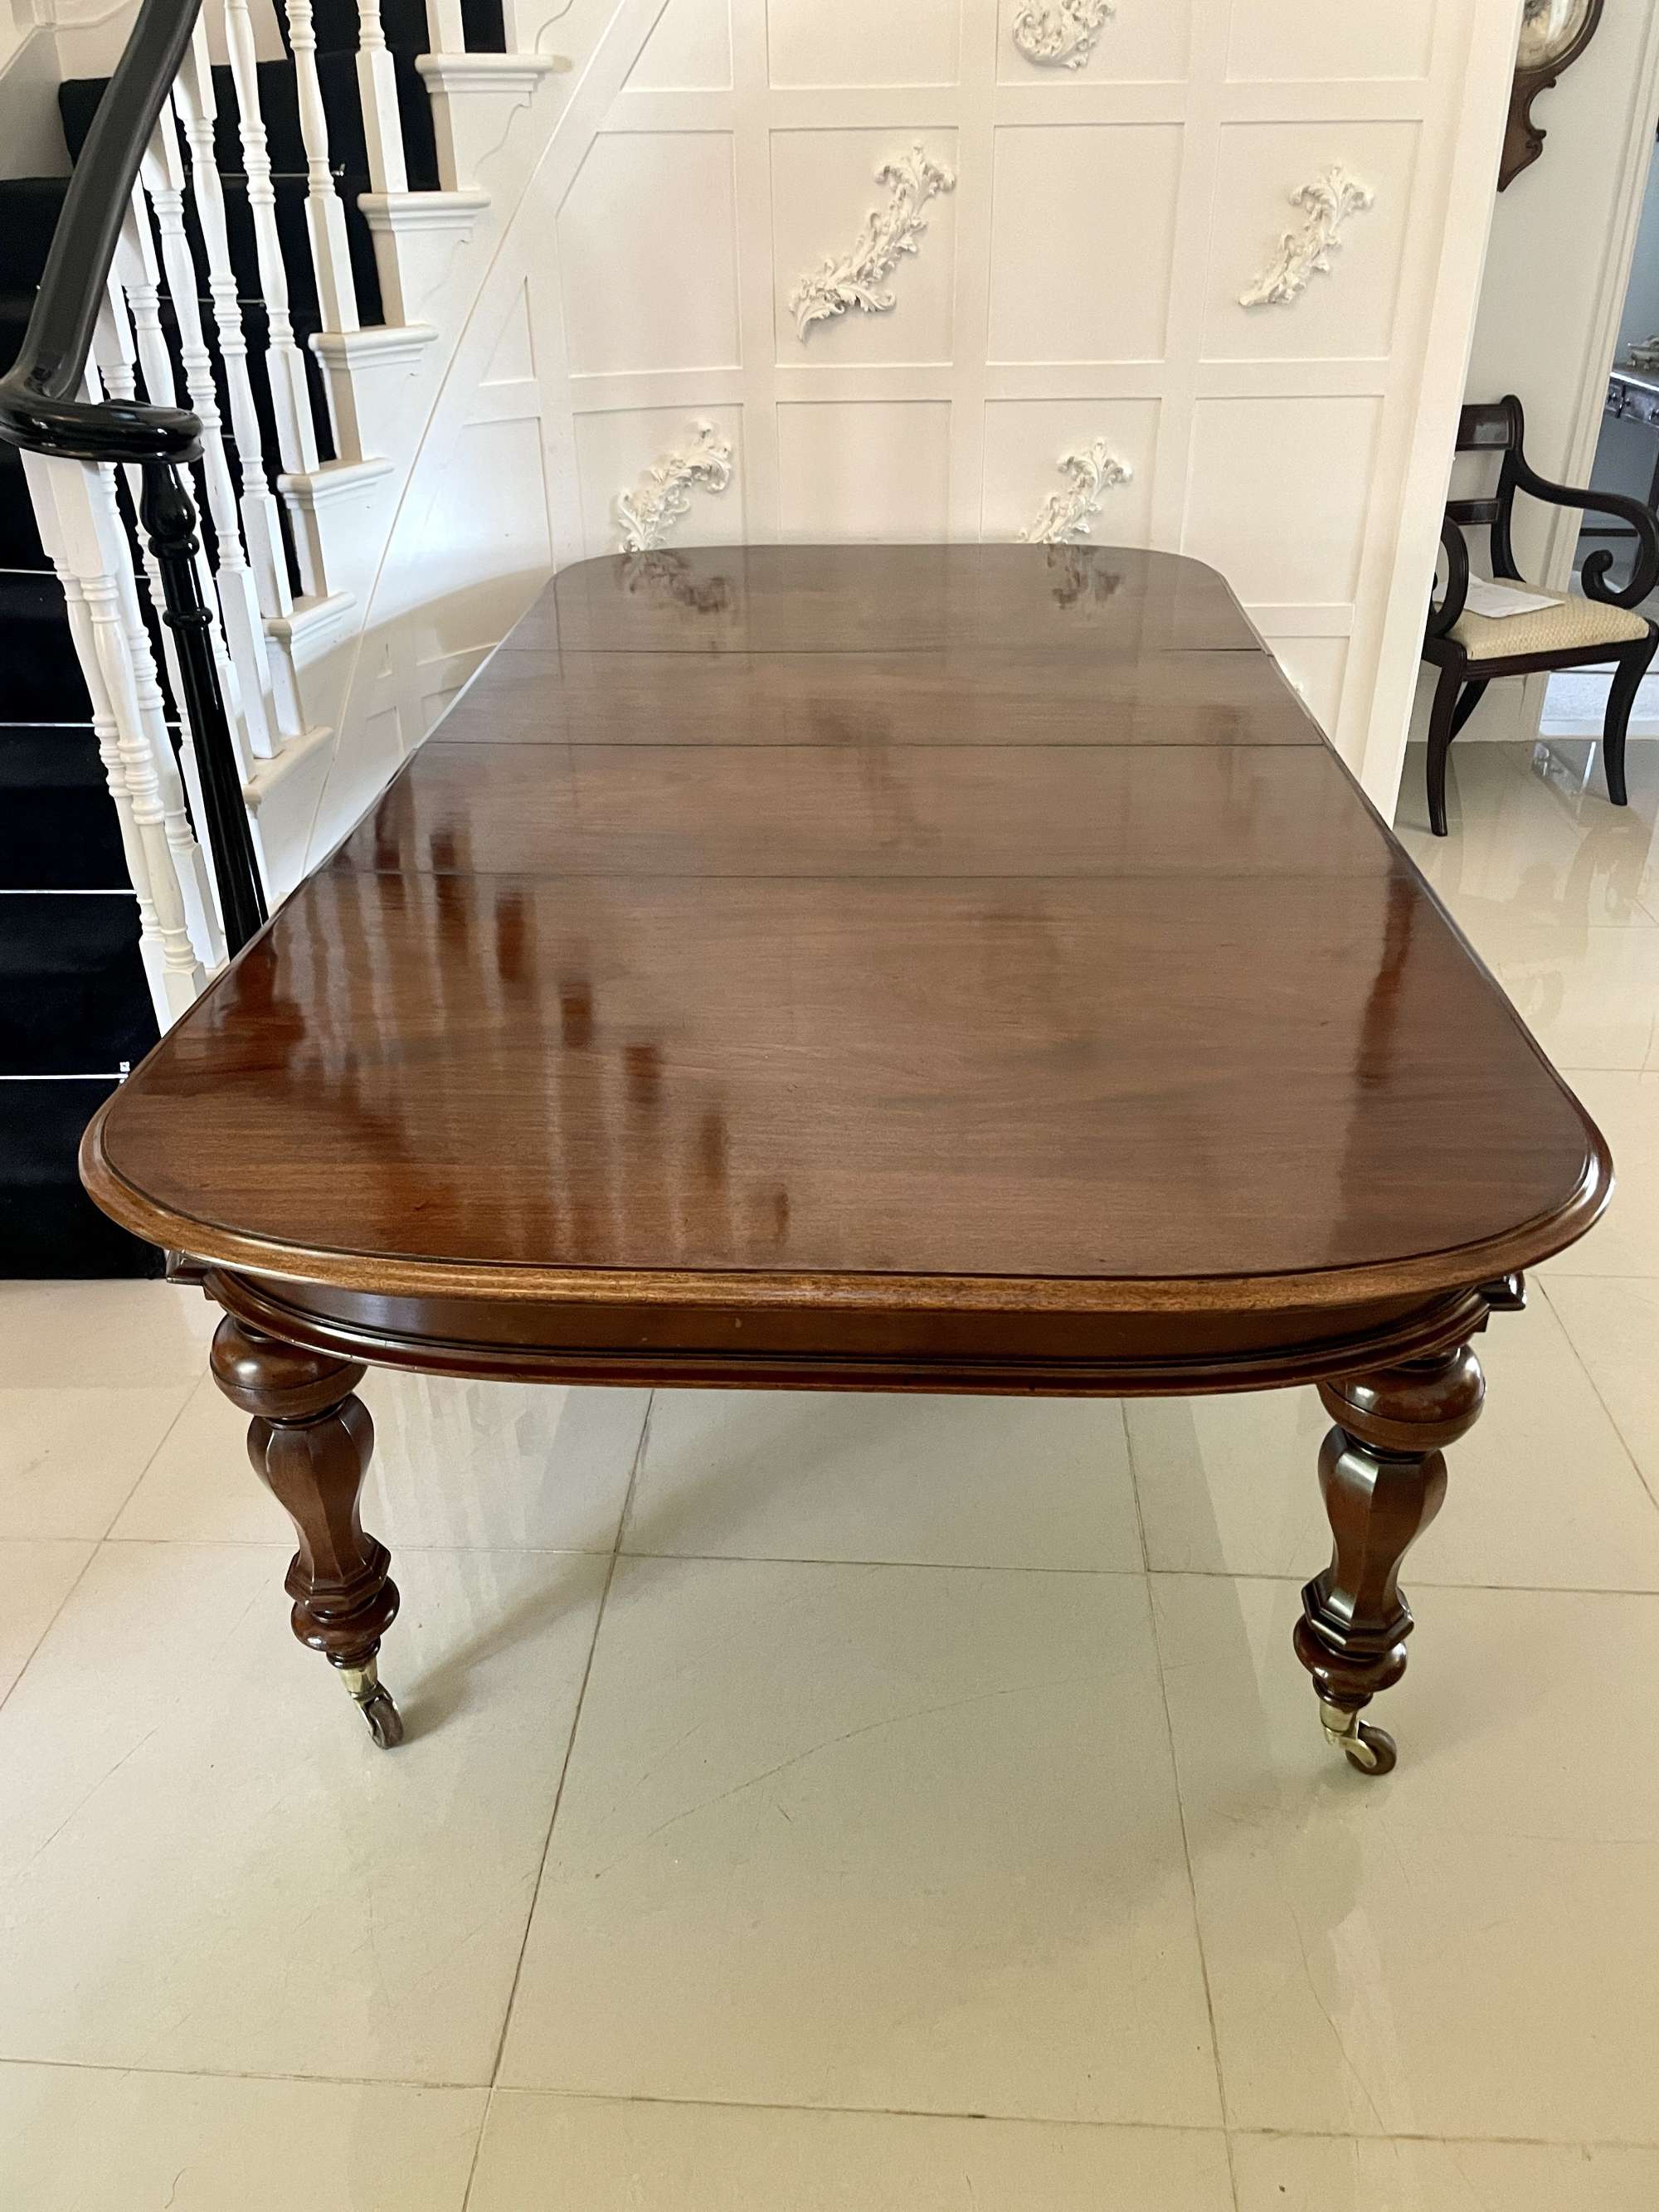 Superb Quality Antique Victorian Figured Mahogany Extending Dining Table 74 X 120 X 241cm